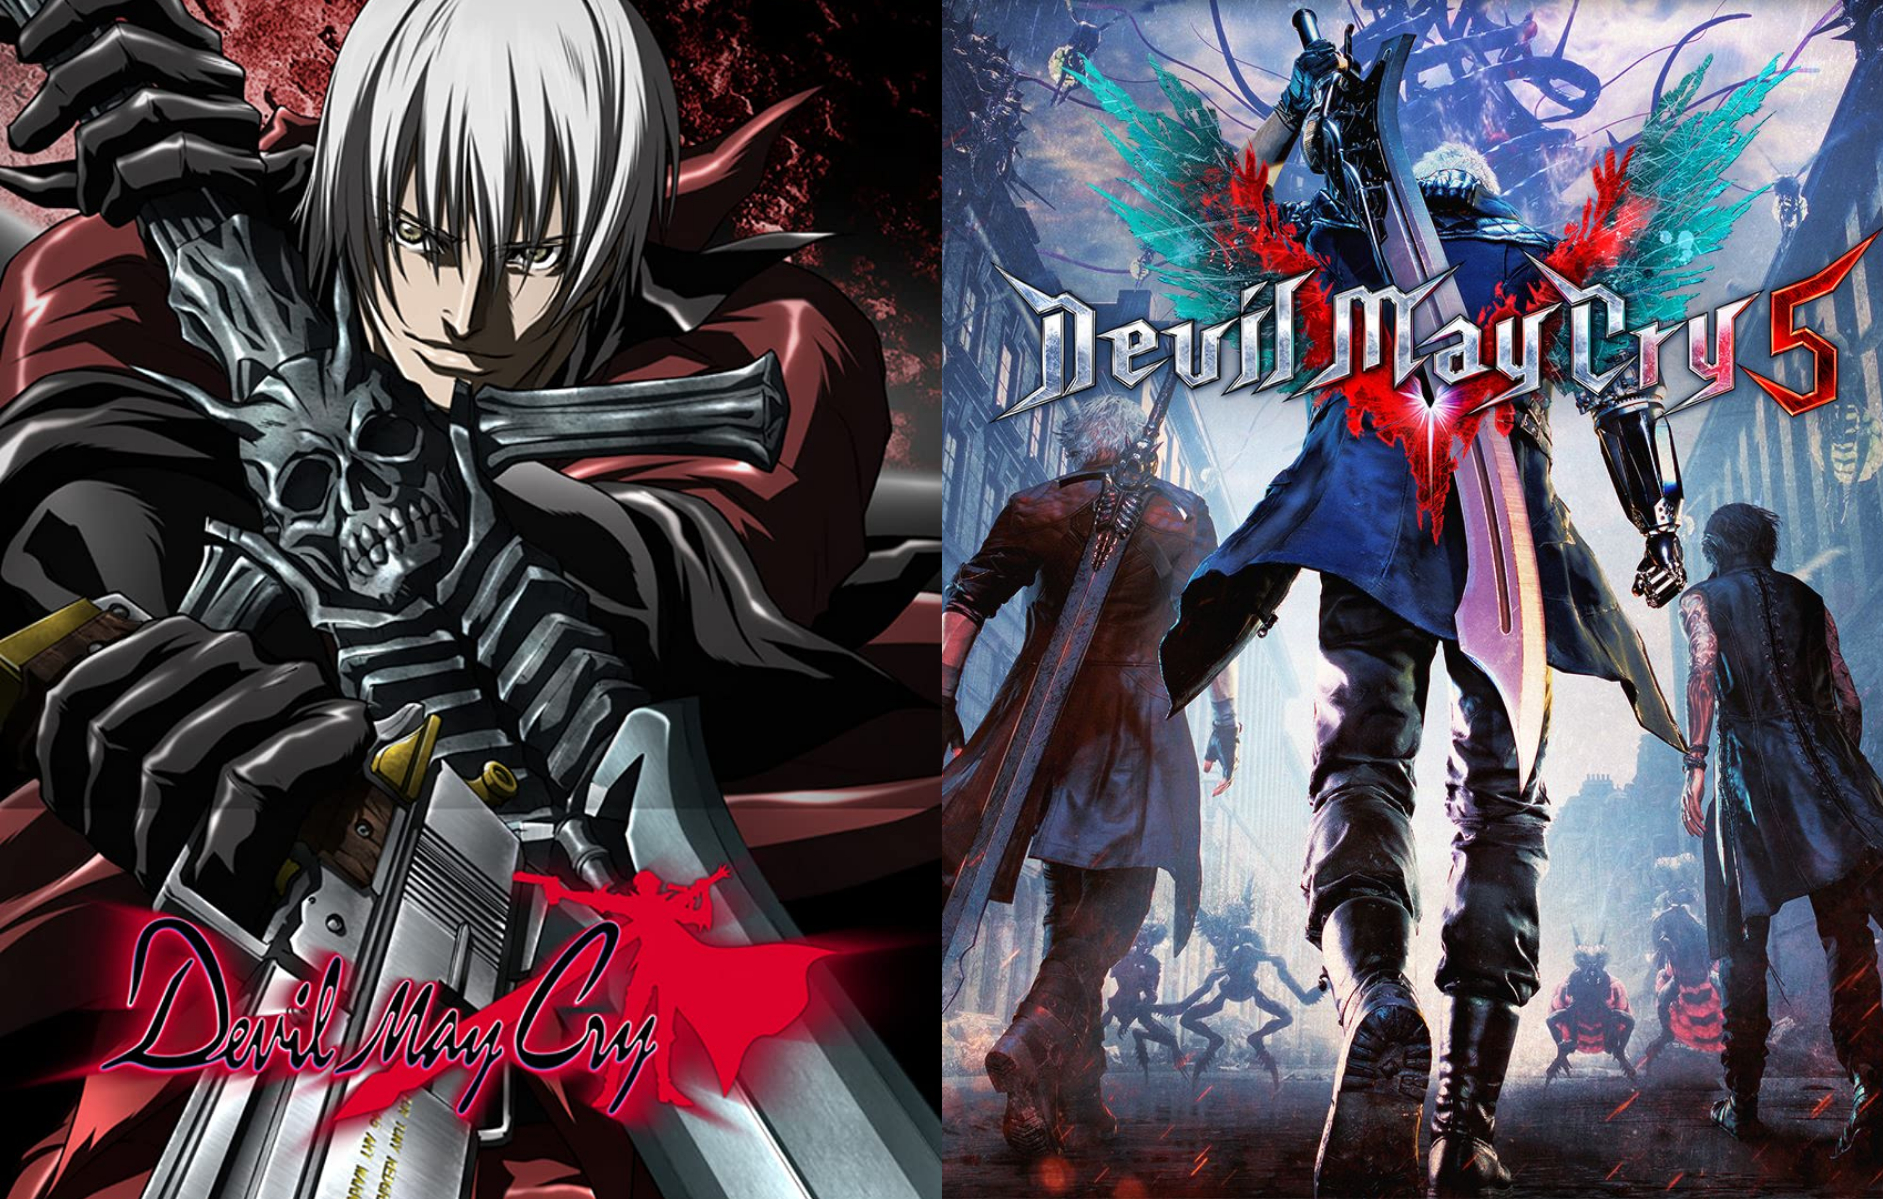 Devil May Cry Anime and Game key visuals